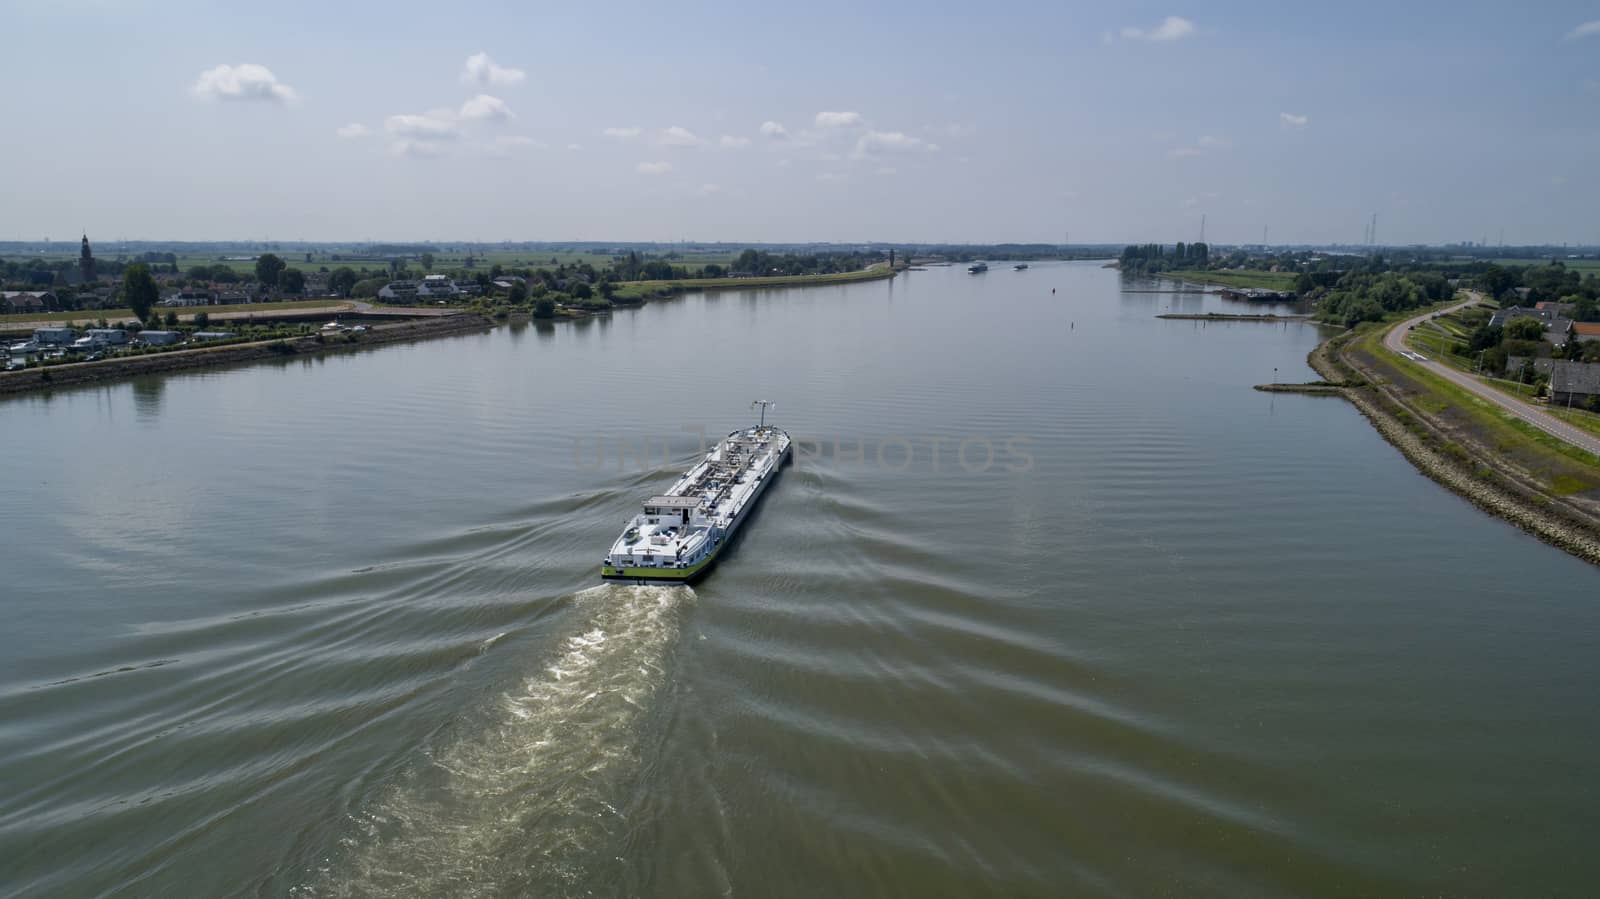 Aerial view:Barge with cargo on the river. River, cargo barge, h by Tjeerdkruse